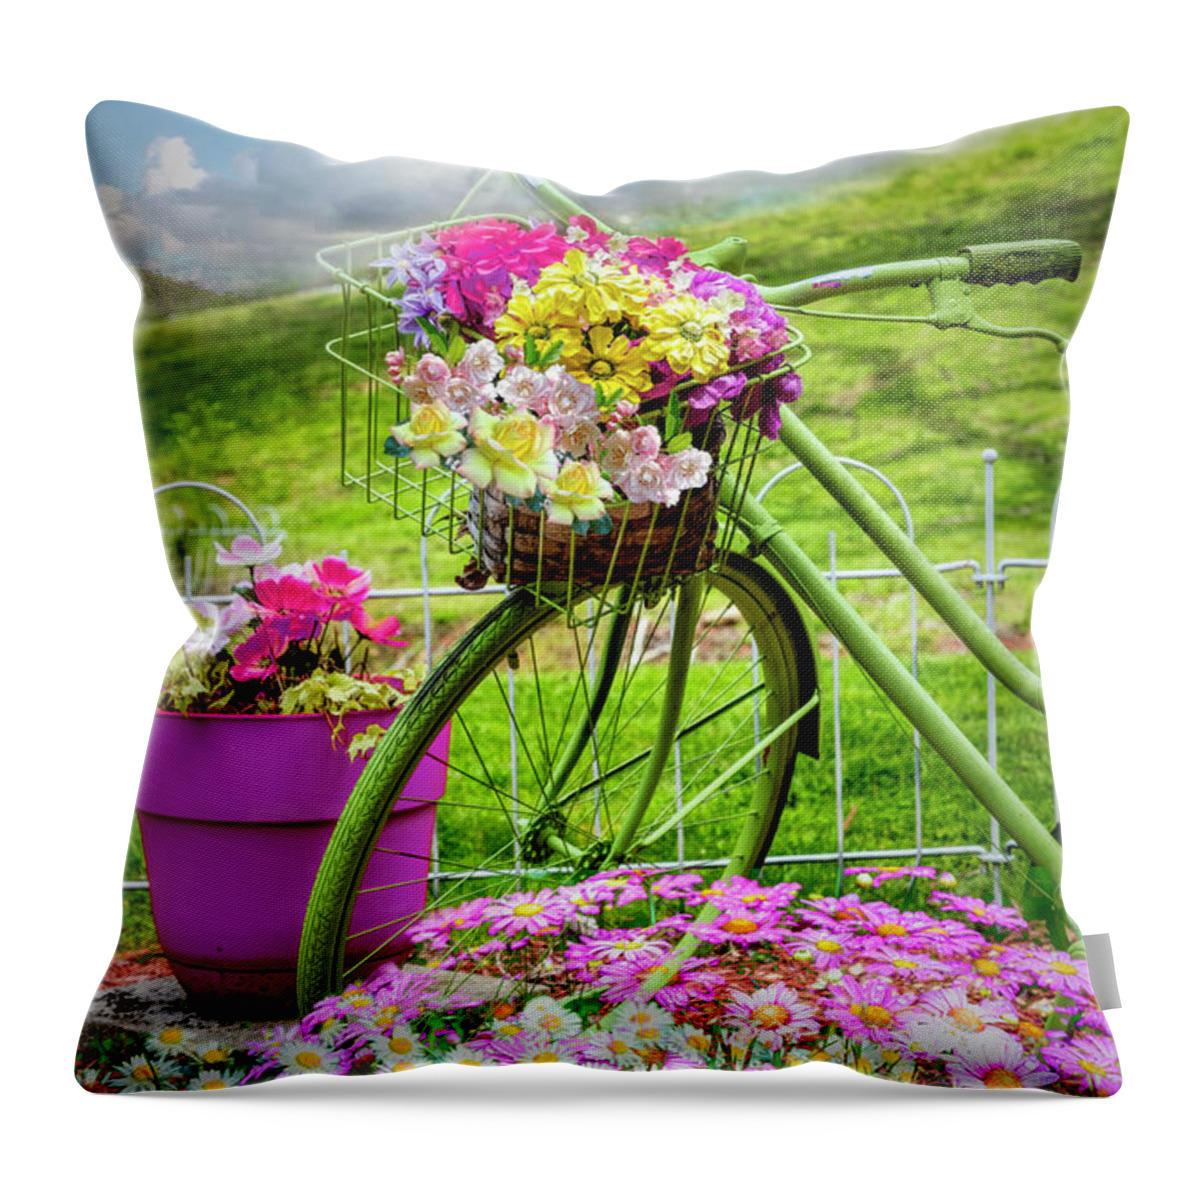 Birds Throw Pillow featuring the photograph Summer Morning by Debra and Dave Vanderlaan